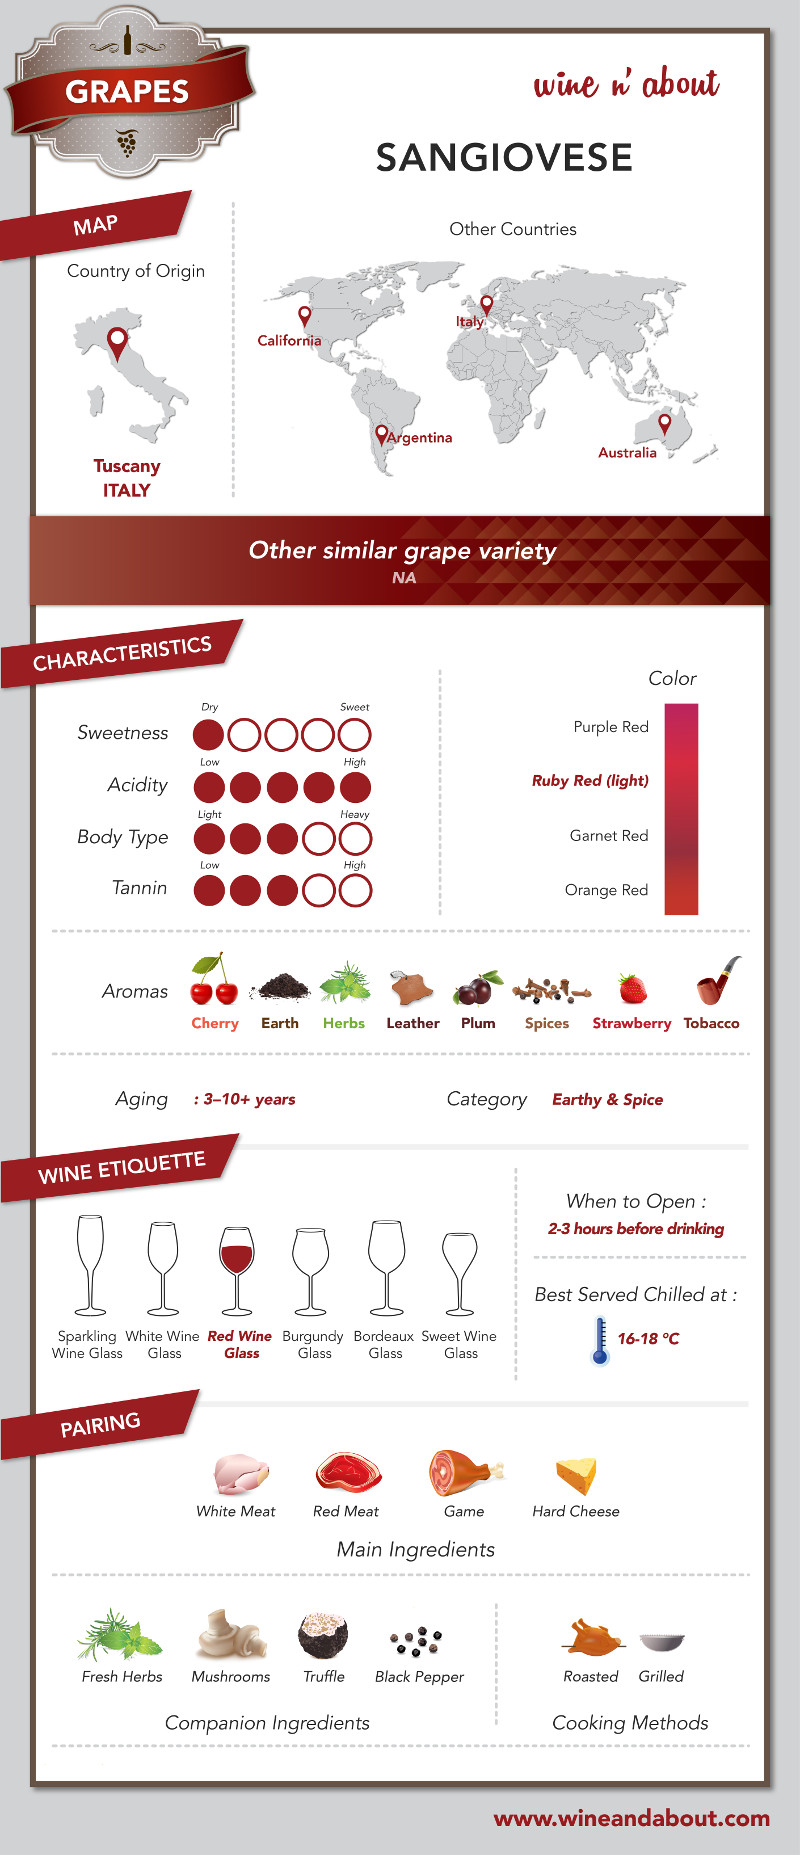 wine_n_about_grape_sangiovese